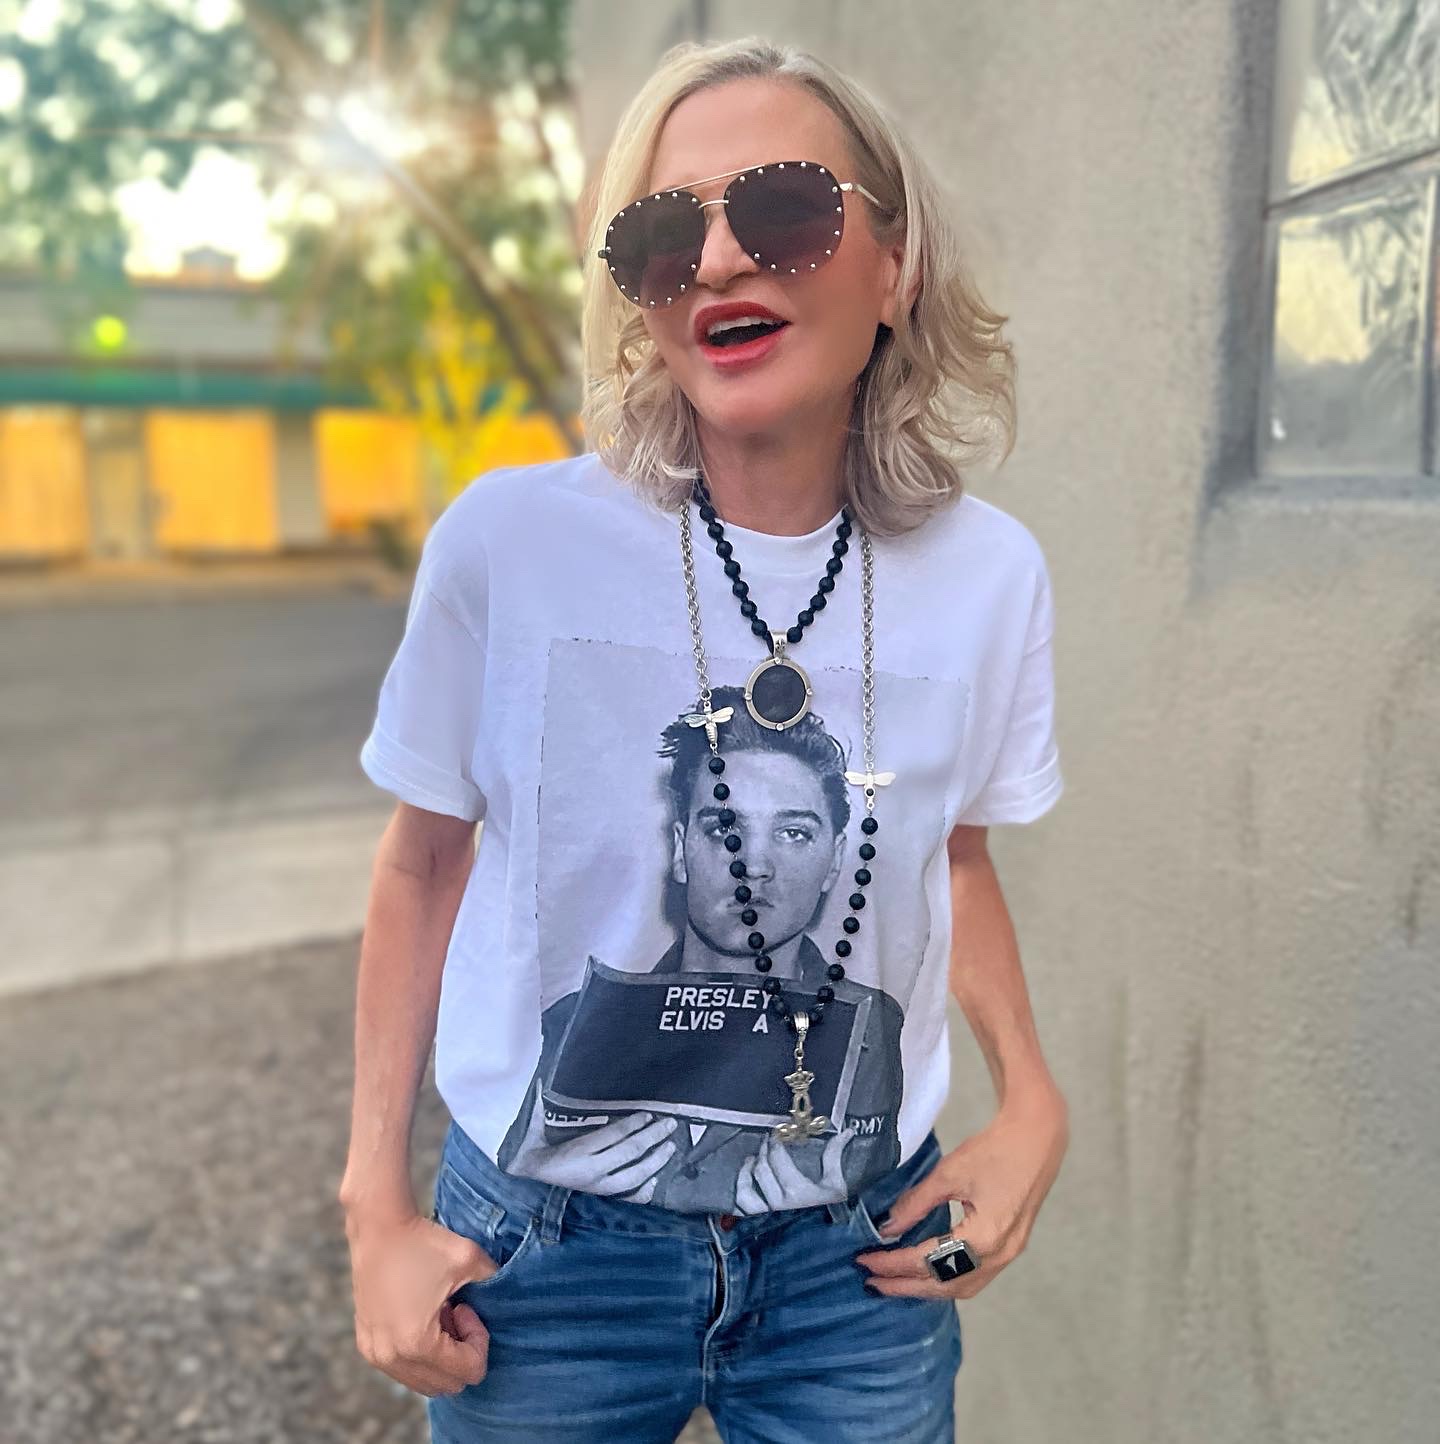 Lifestyle Influencer, Jamie Lewinger of More Than Turquoise wearing Elvis tee from Etsy